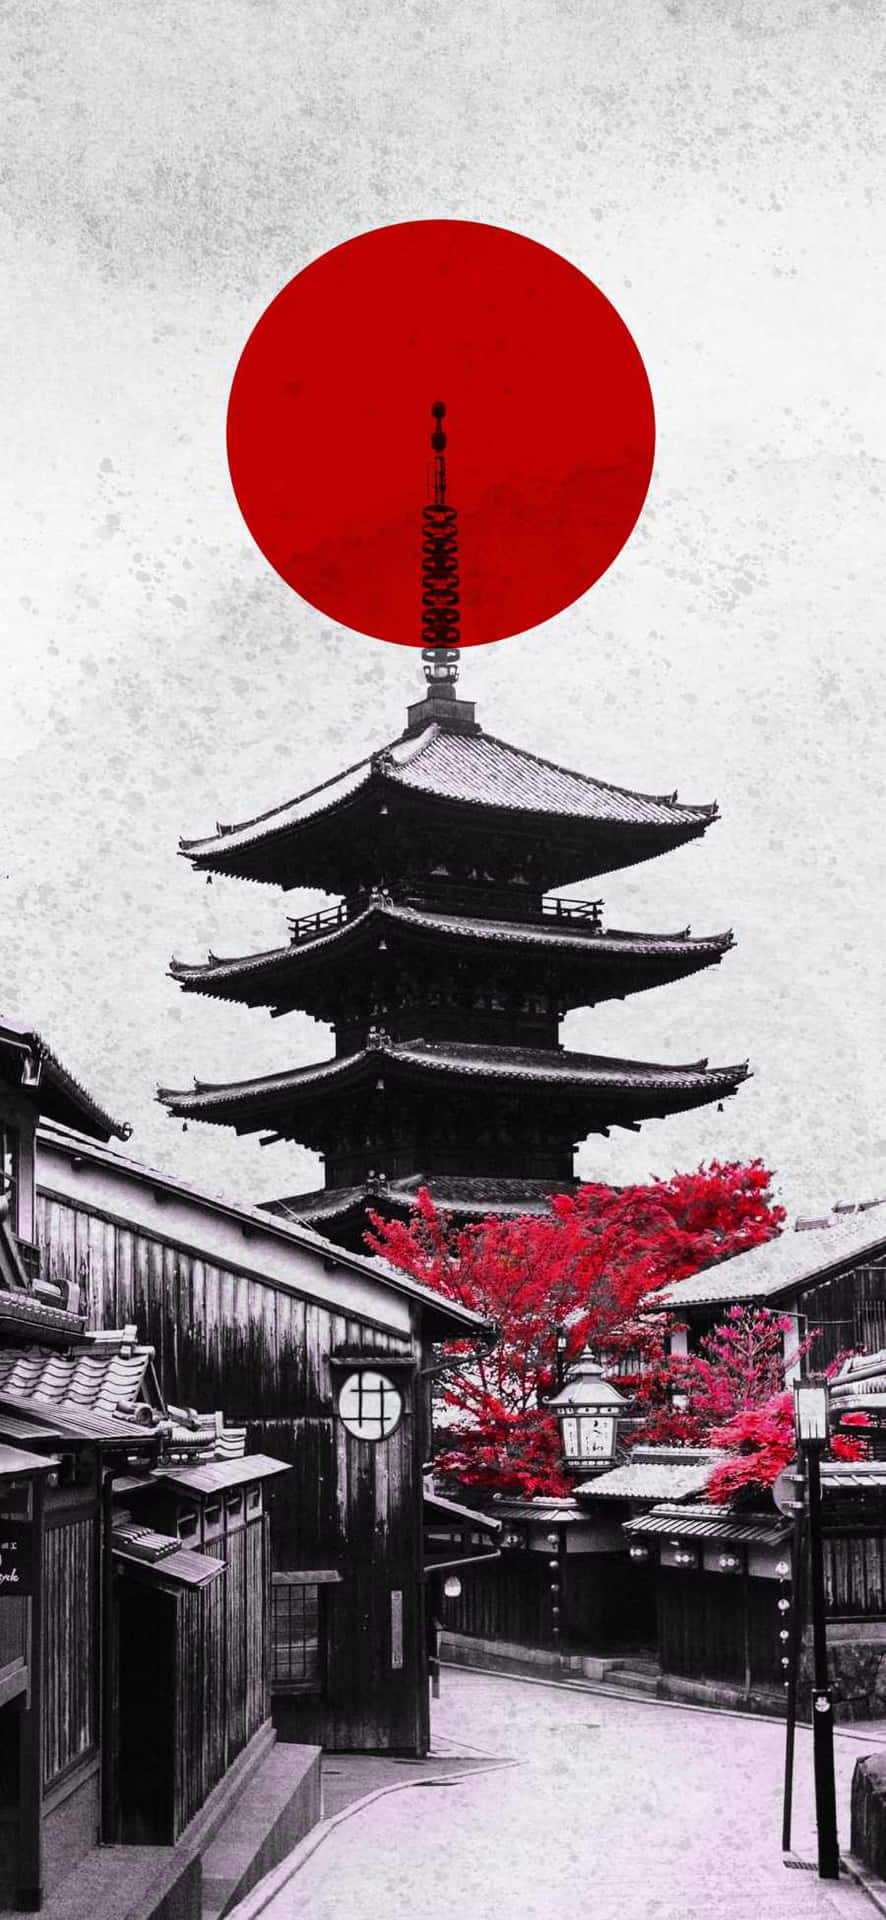 A Red Pagoda With A Red Circle In The Middle Background